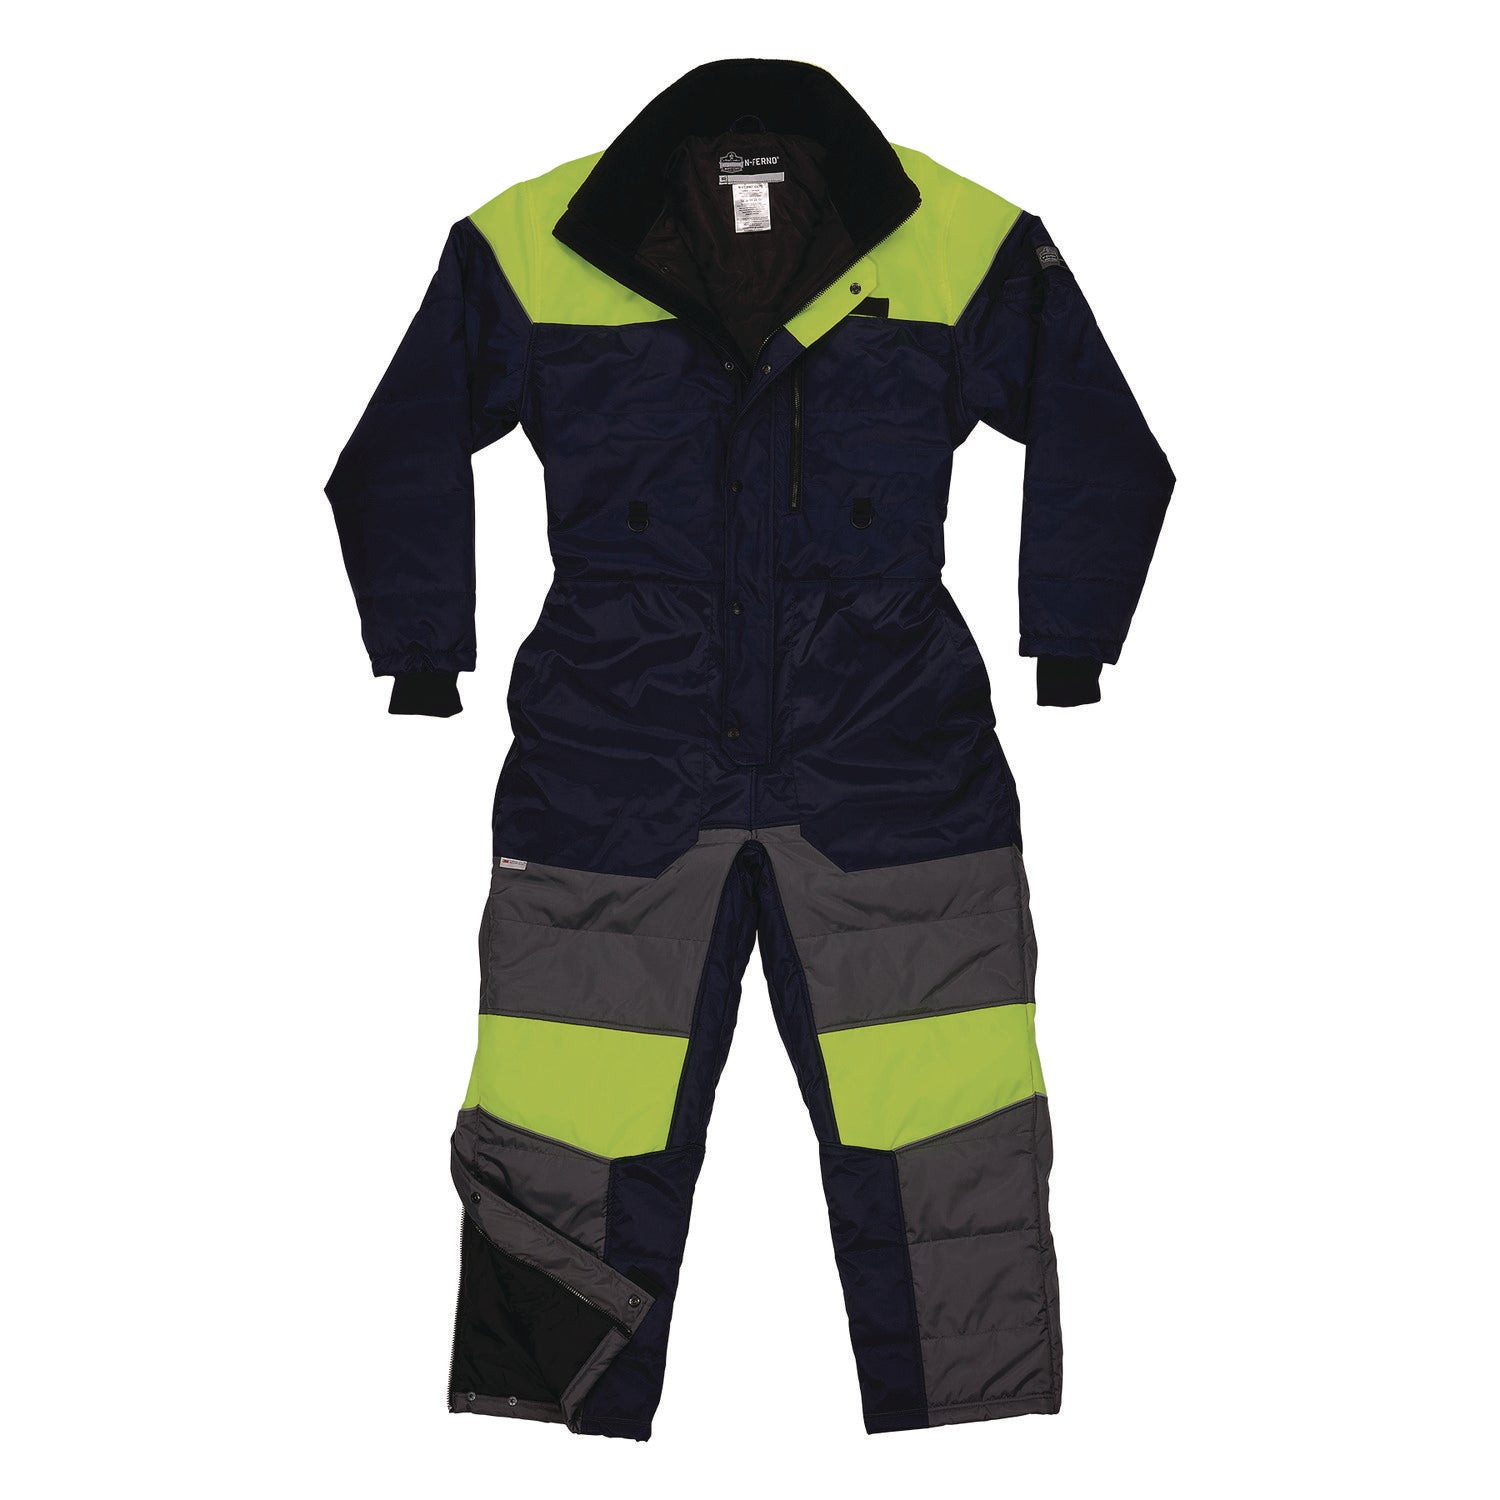 n-ferno-6475-insulated-freezer-coverall-medium-navy-ships-in-1-3-business-days_ego41243 - 1